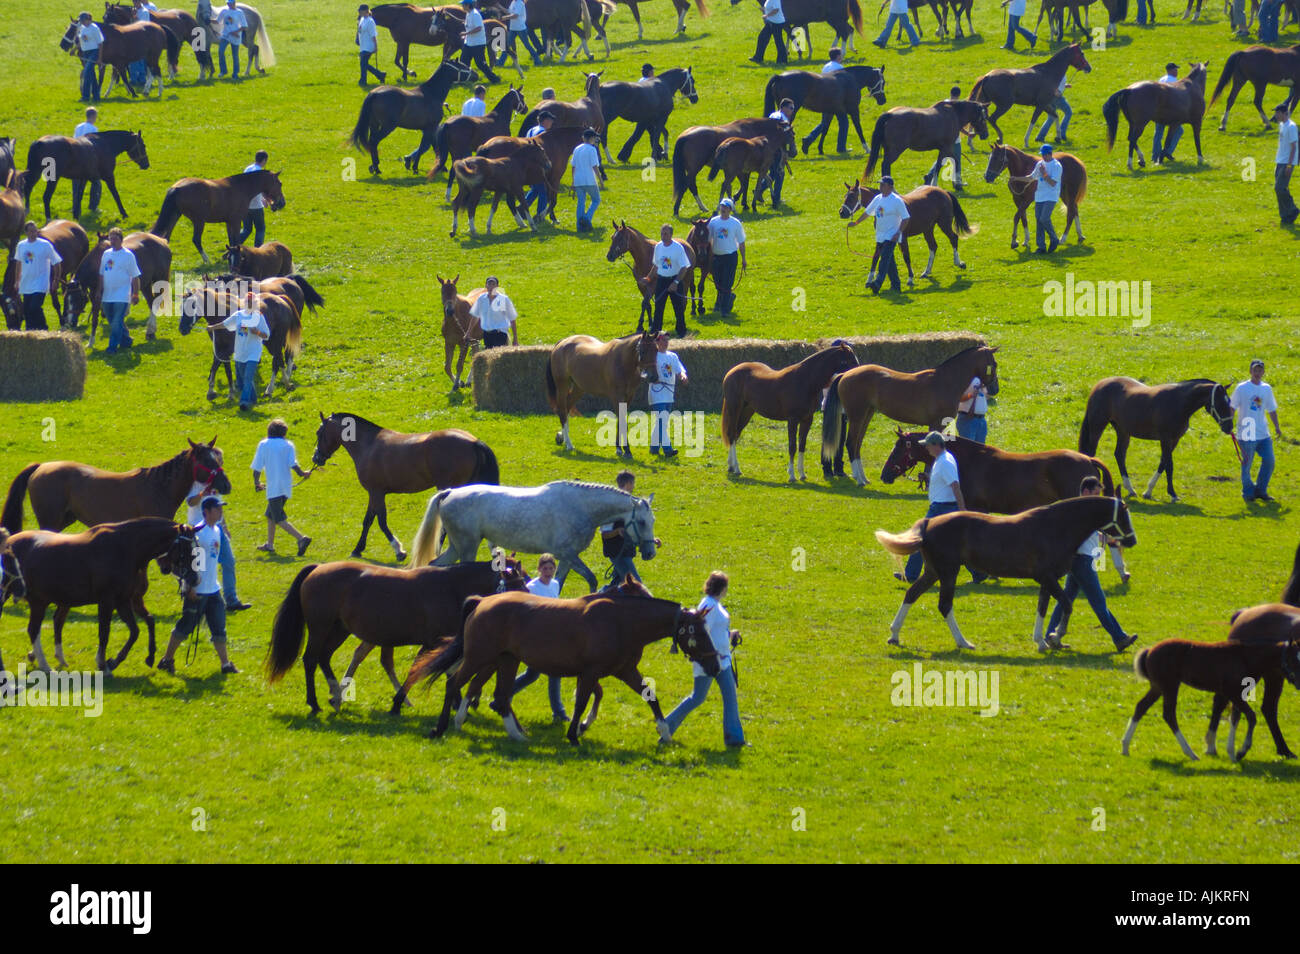 Mares and their foals for sale at the annual Saignelegier Horse Fair Switzerland Stock Photo